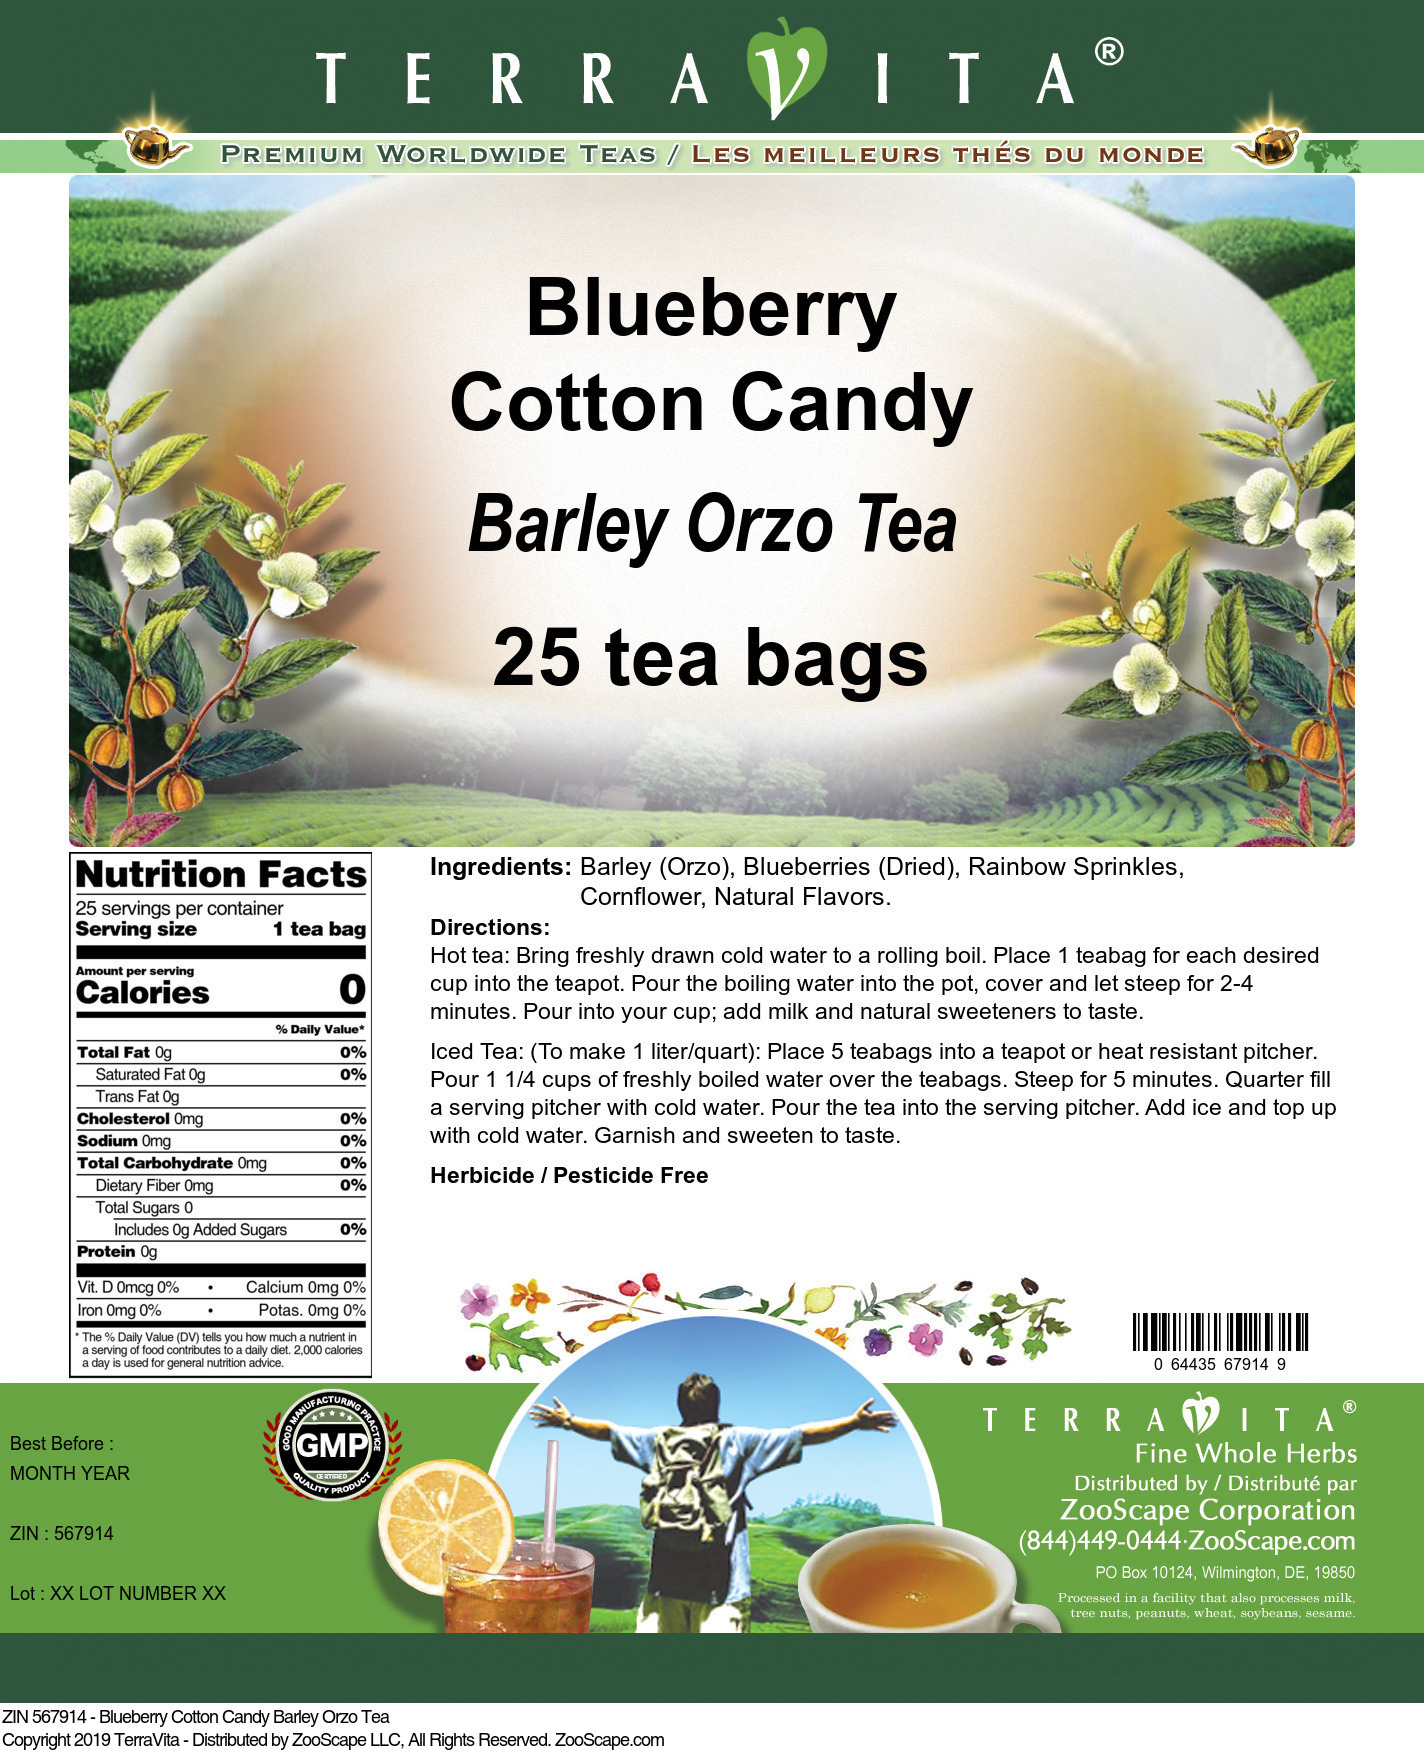 Blueberry Cotton Candy Barley Orzo Tea - Label